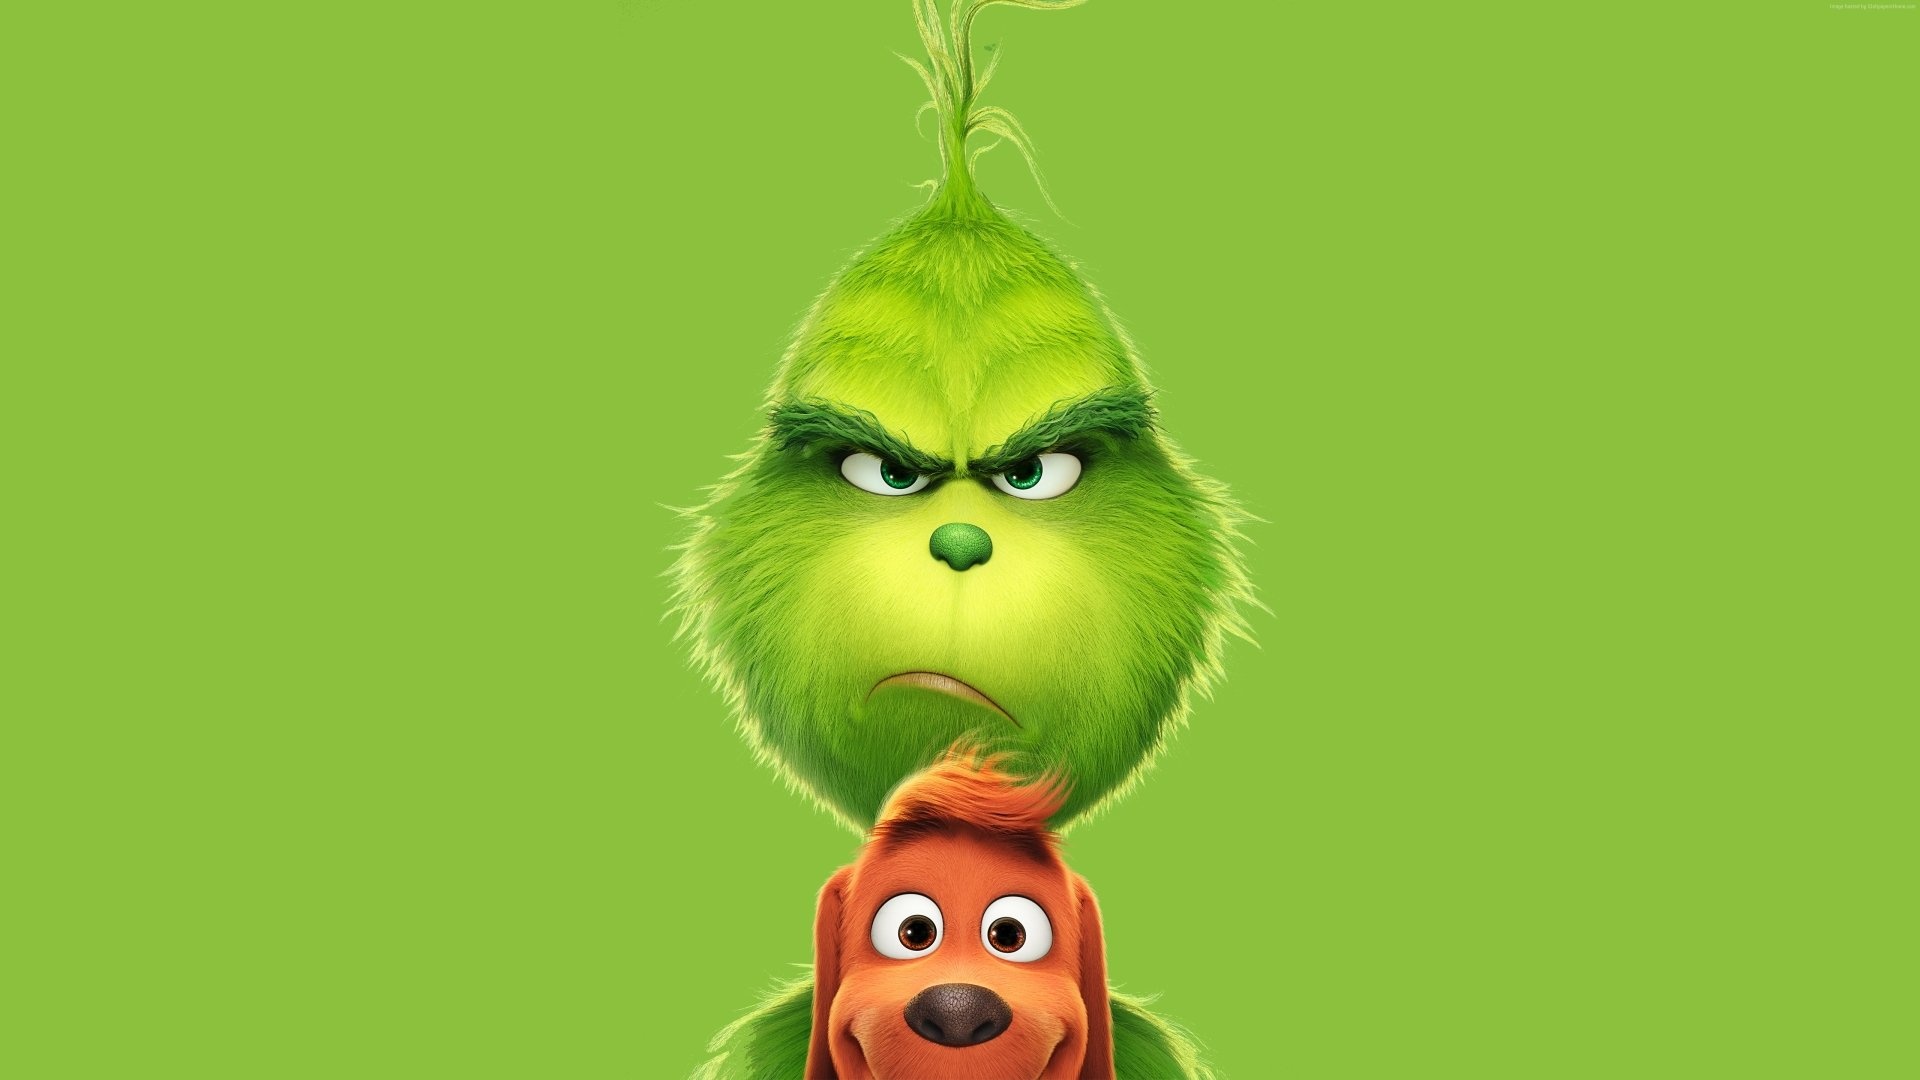 The Grinch HD wallpapers, Vibrant images, Festive cheer, Holiday backdrop, 1920x1080 Full HD Desktop